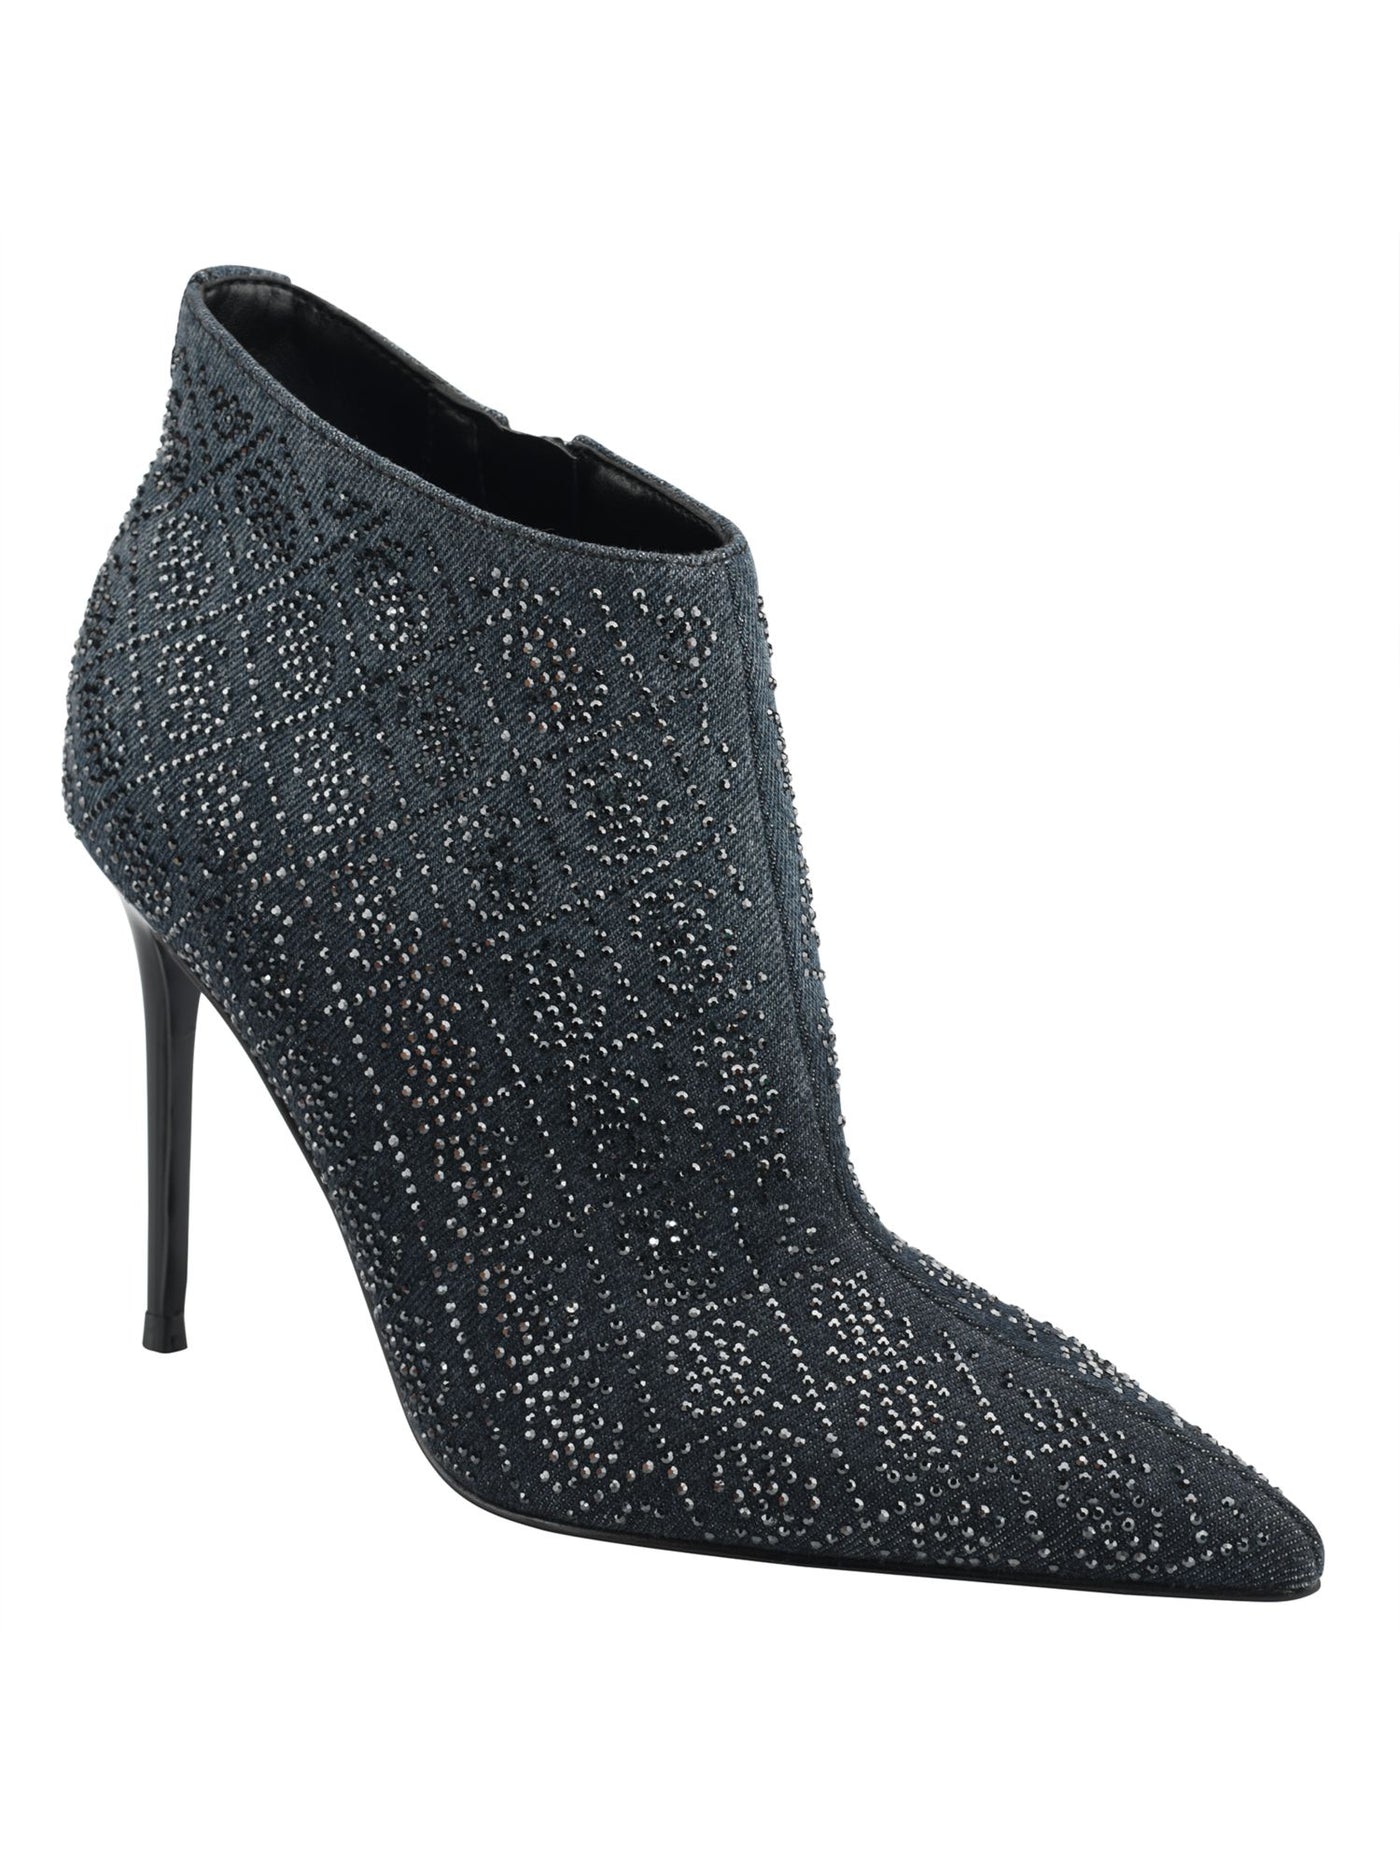 GUESS Womens Navy Embellished Comfort Fazzie Pointed Toe Stiletto Zip-Up Dress Booties 6 M